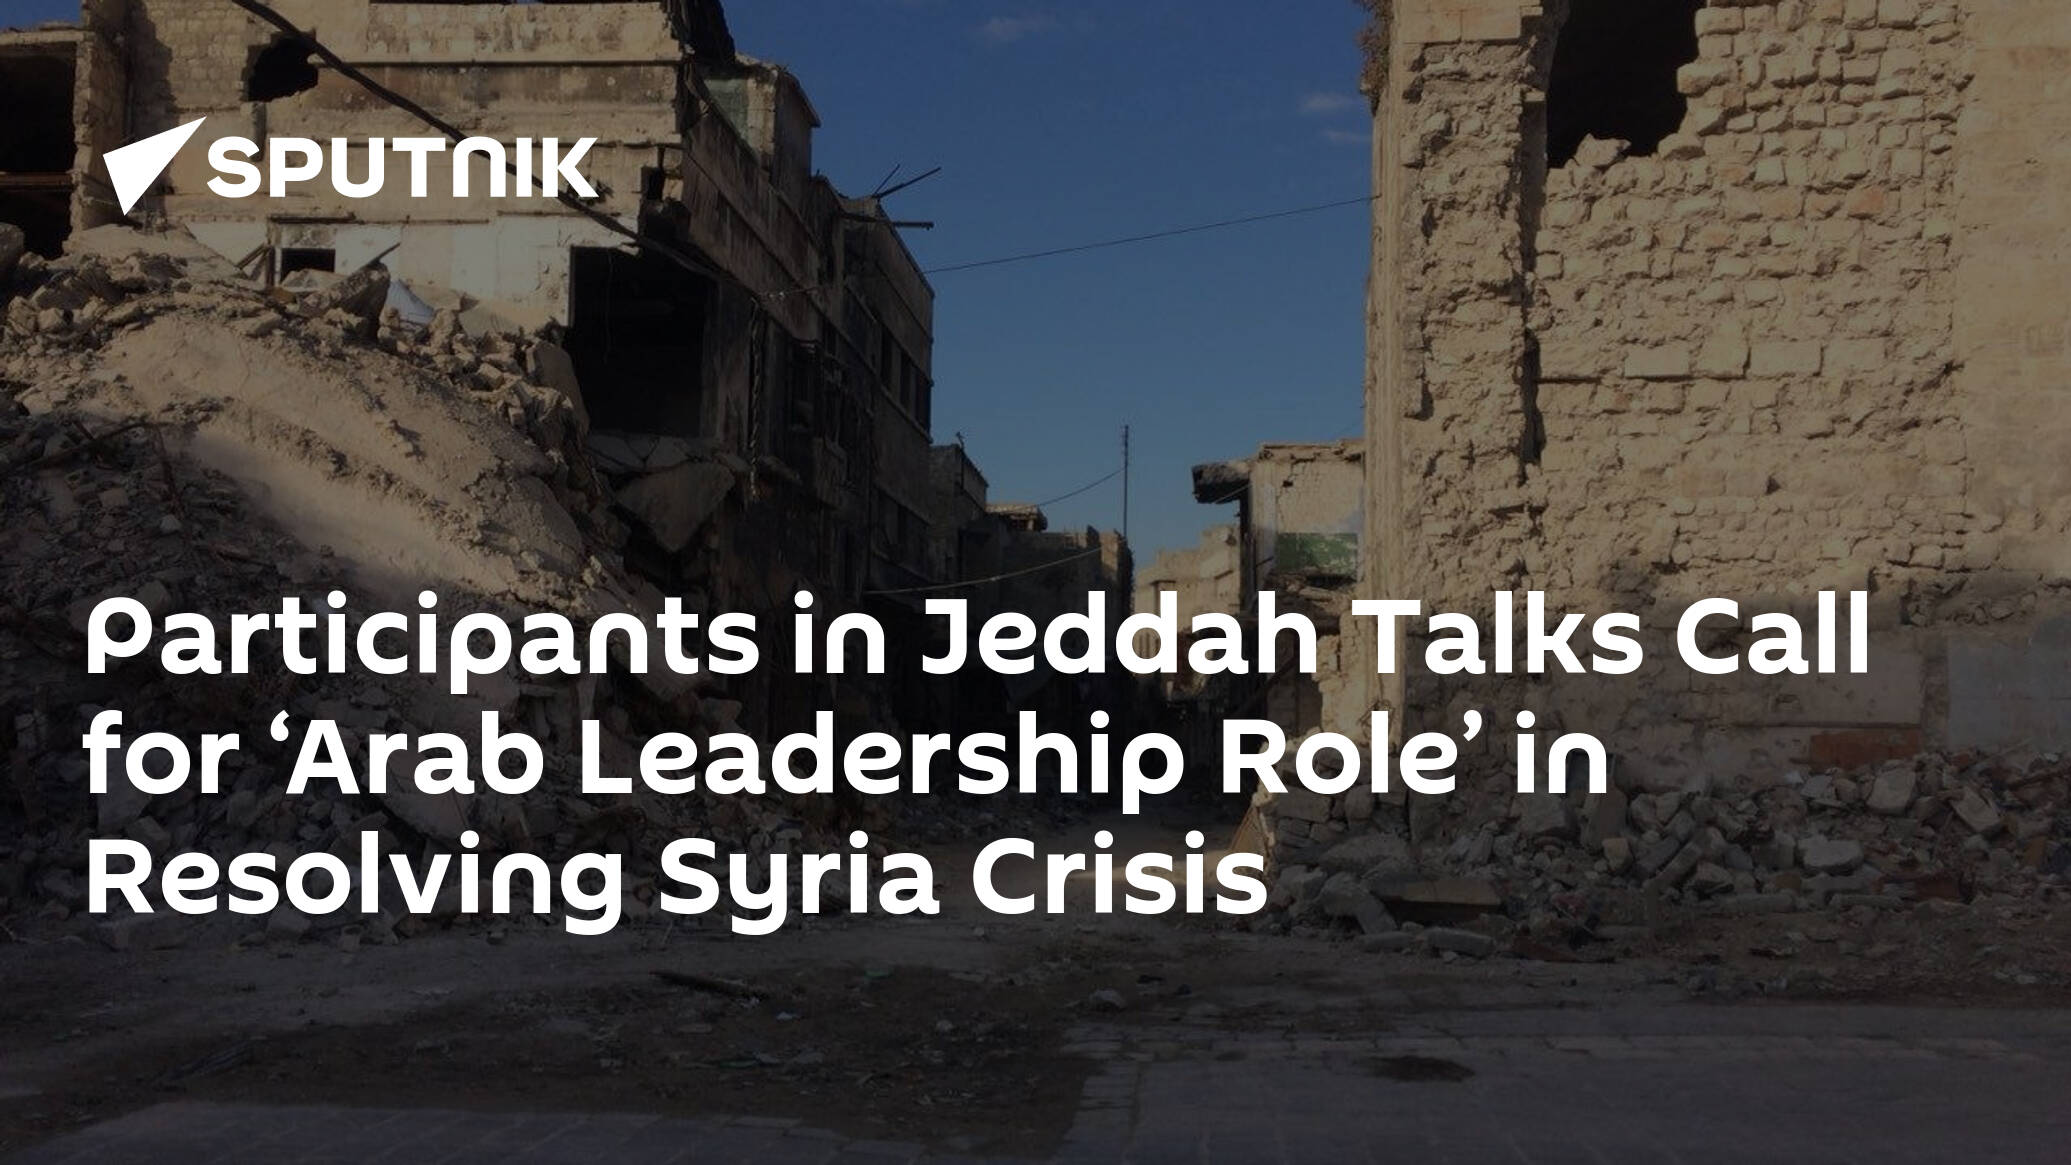 Participants in Jeddah Talks Call for ‘Arab Leadership Role’ in Resolving Syria Crisis